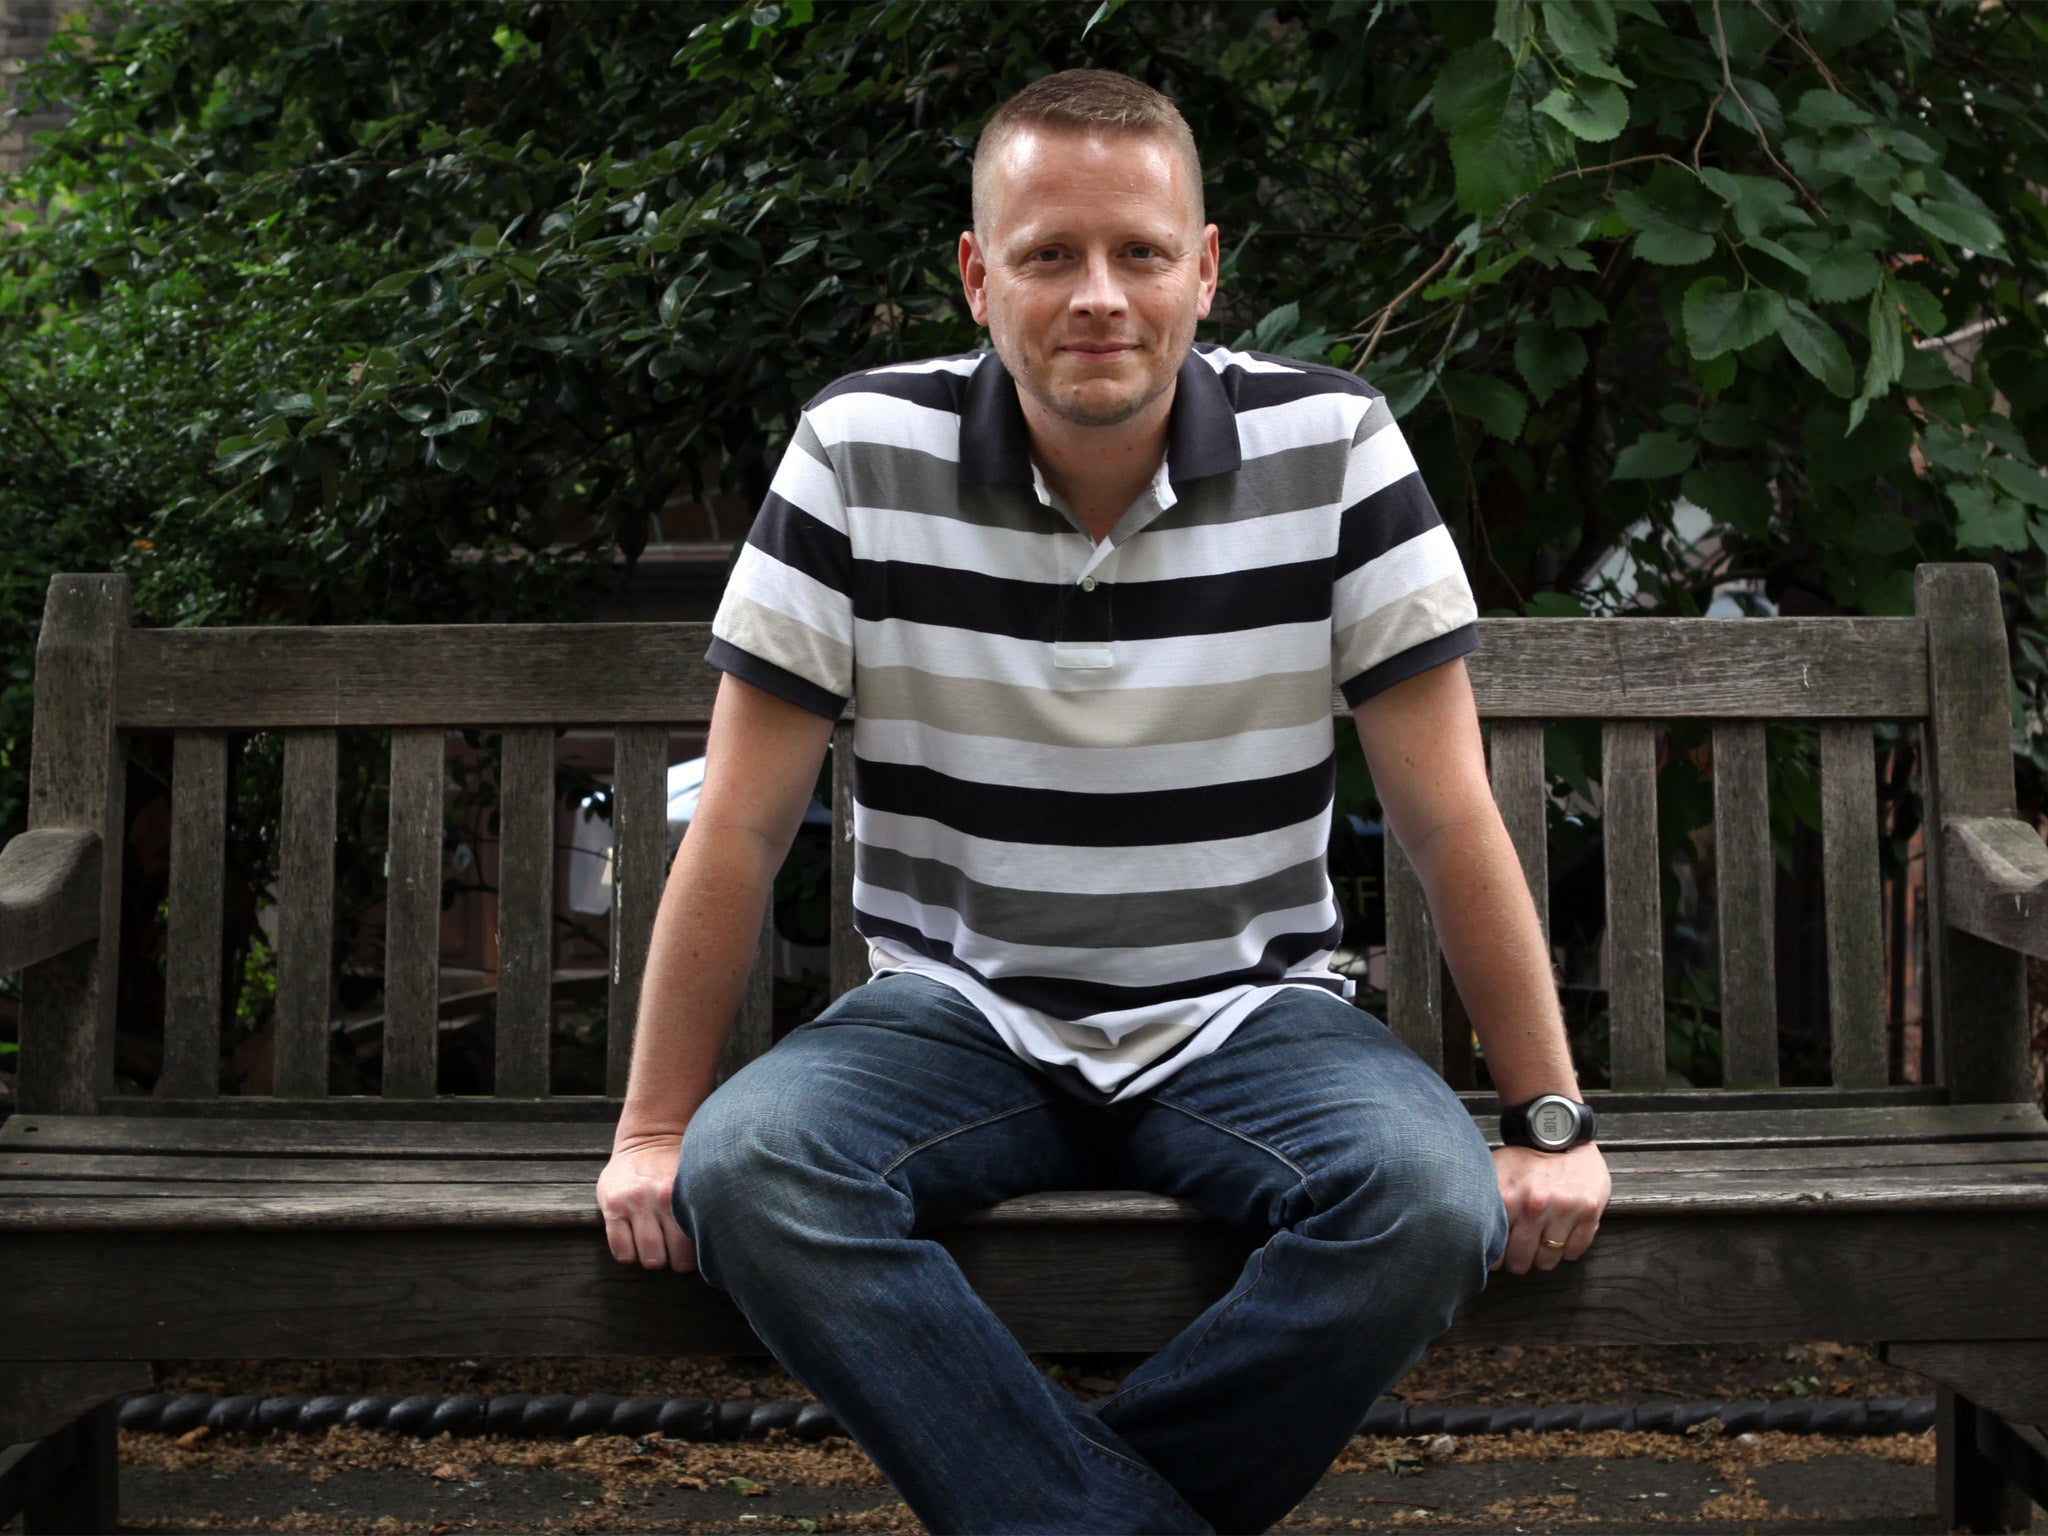 Patrick Ness enjoys flexing his writing muscles